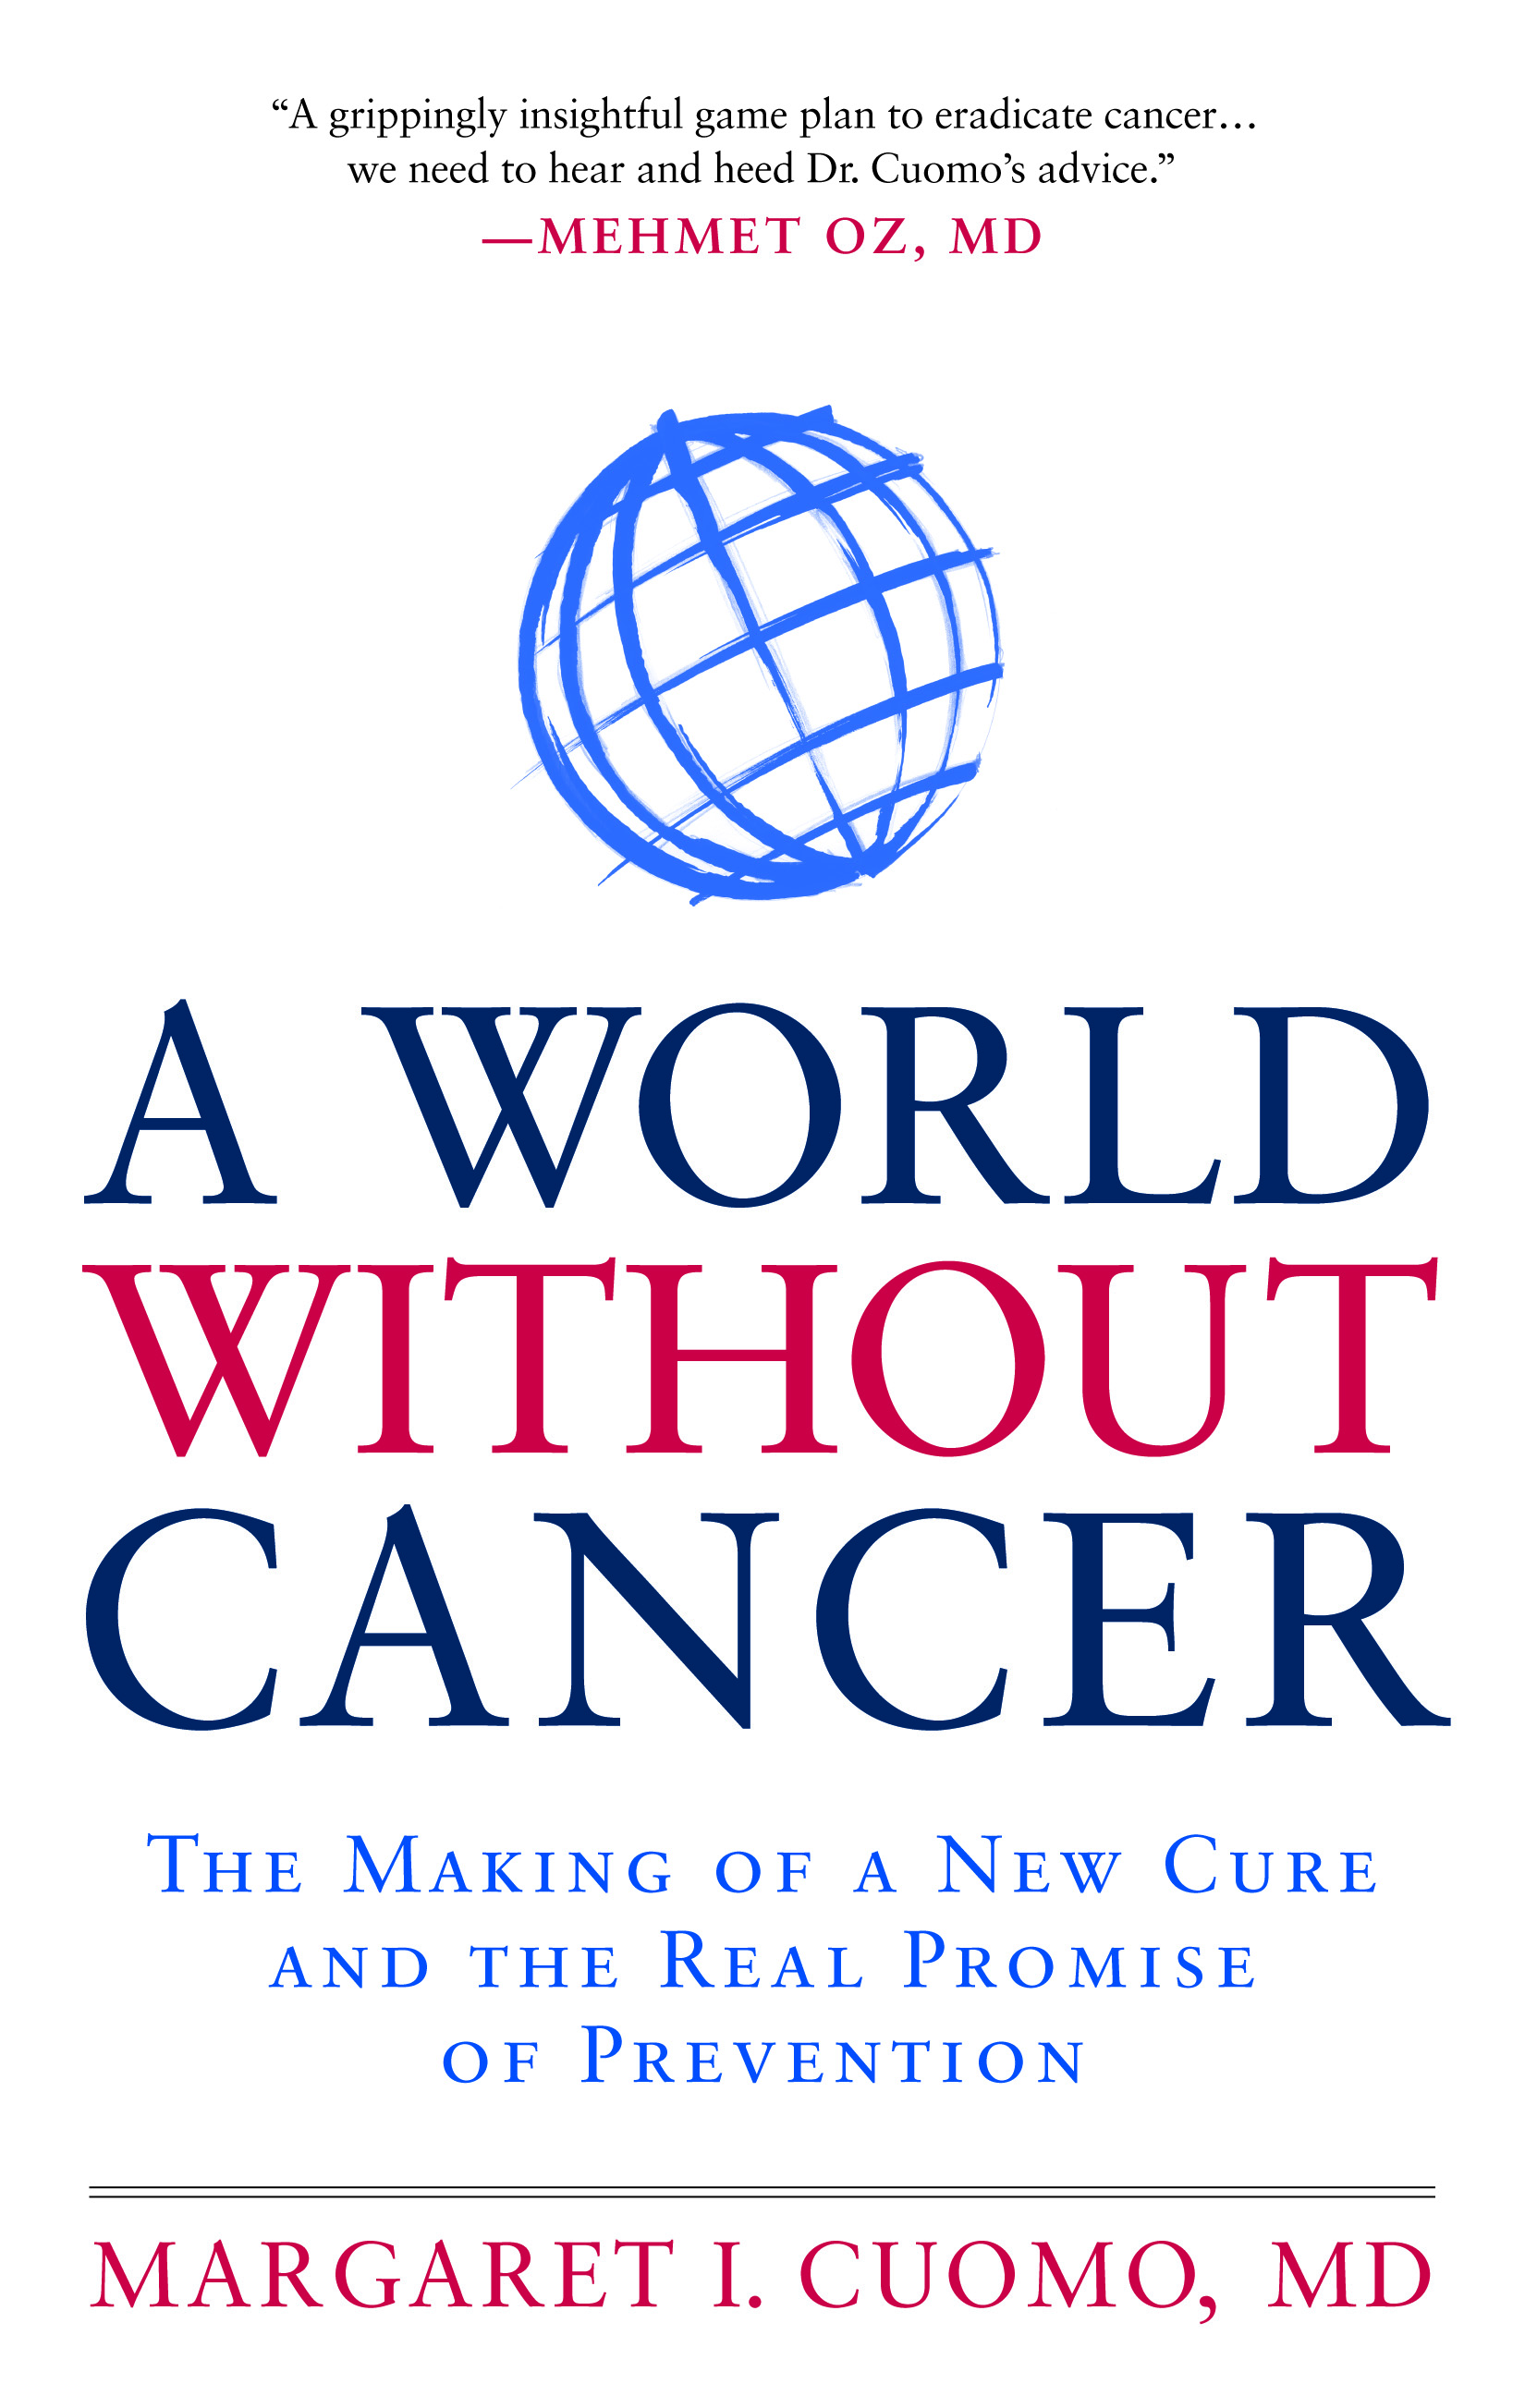 A World Without Cancer by Margaret I Cuomo, MD